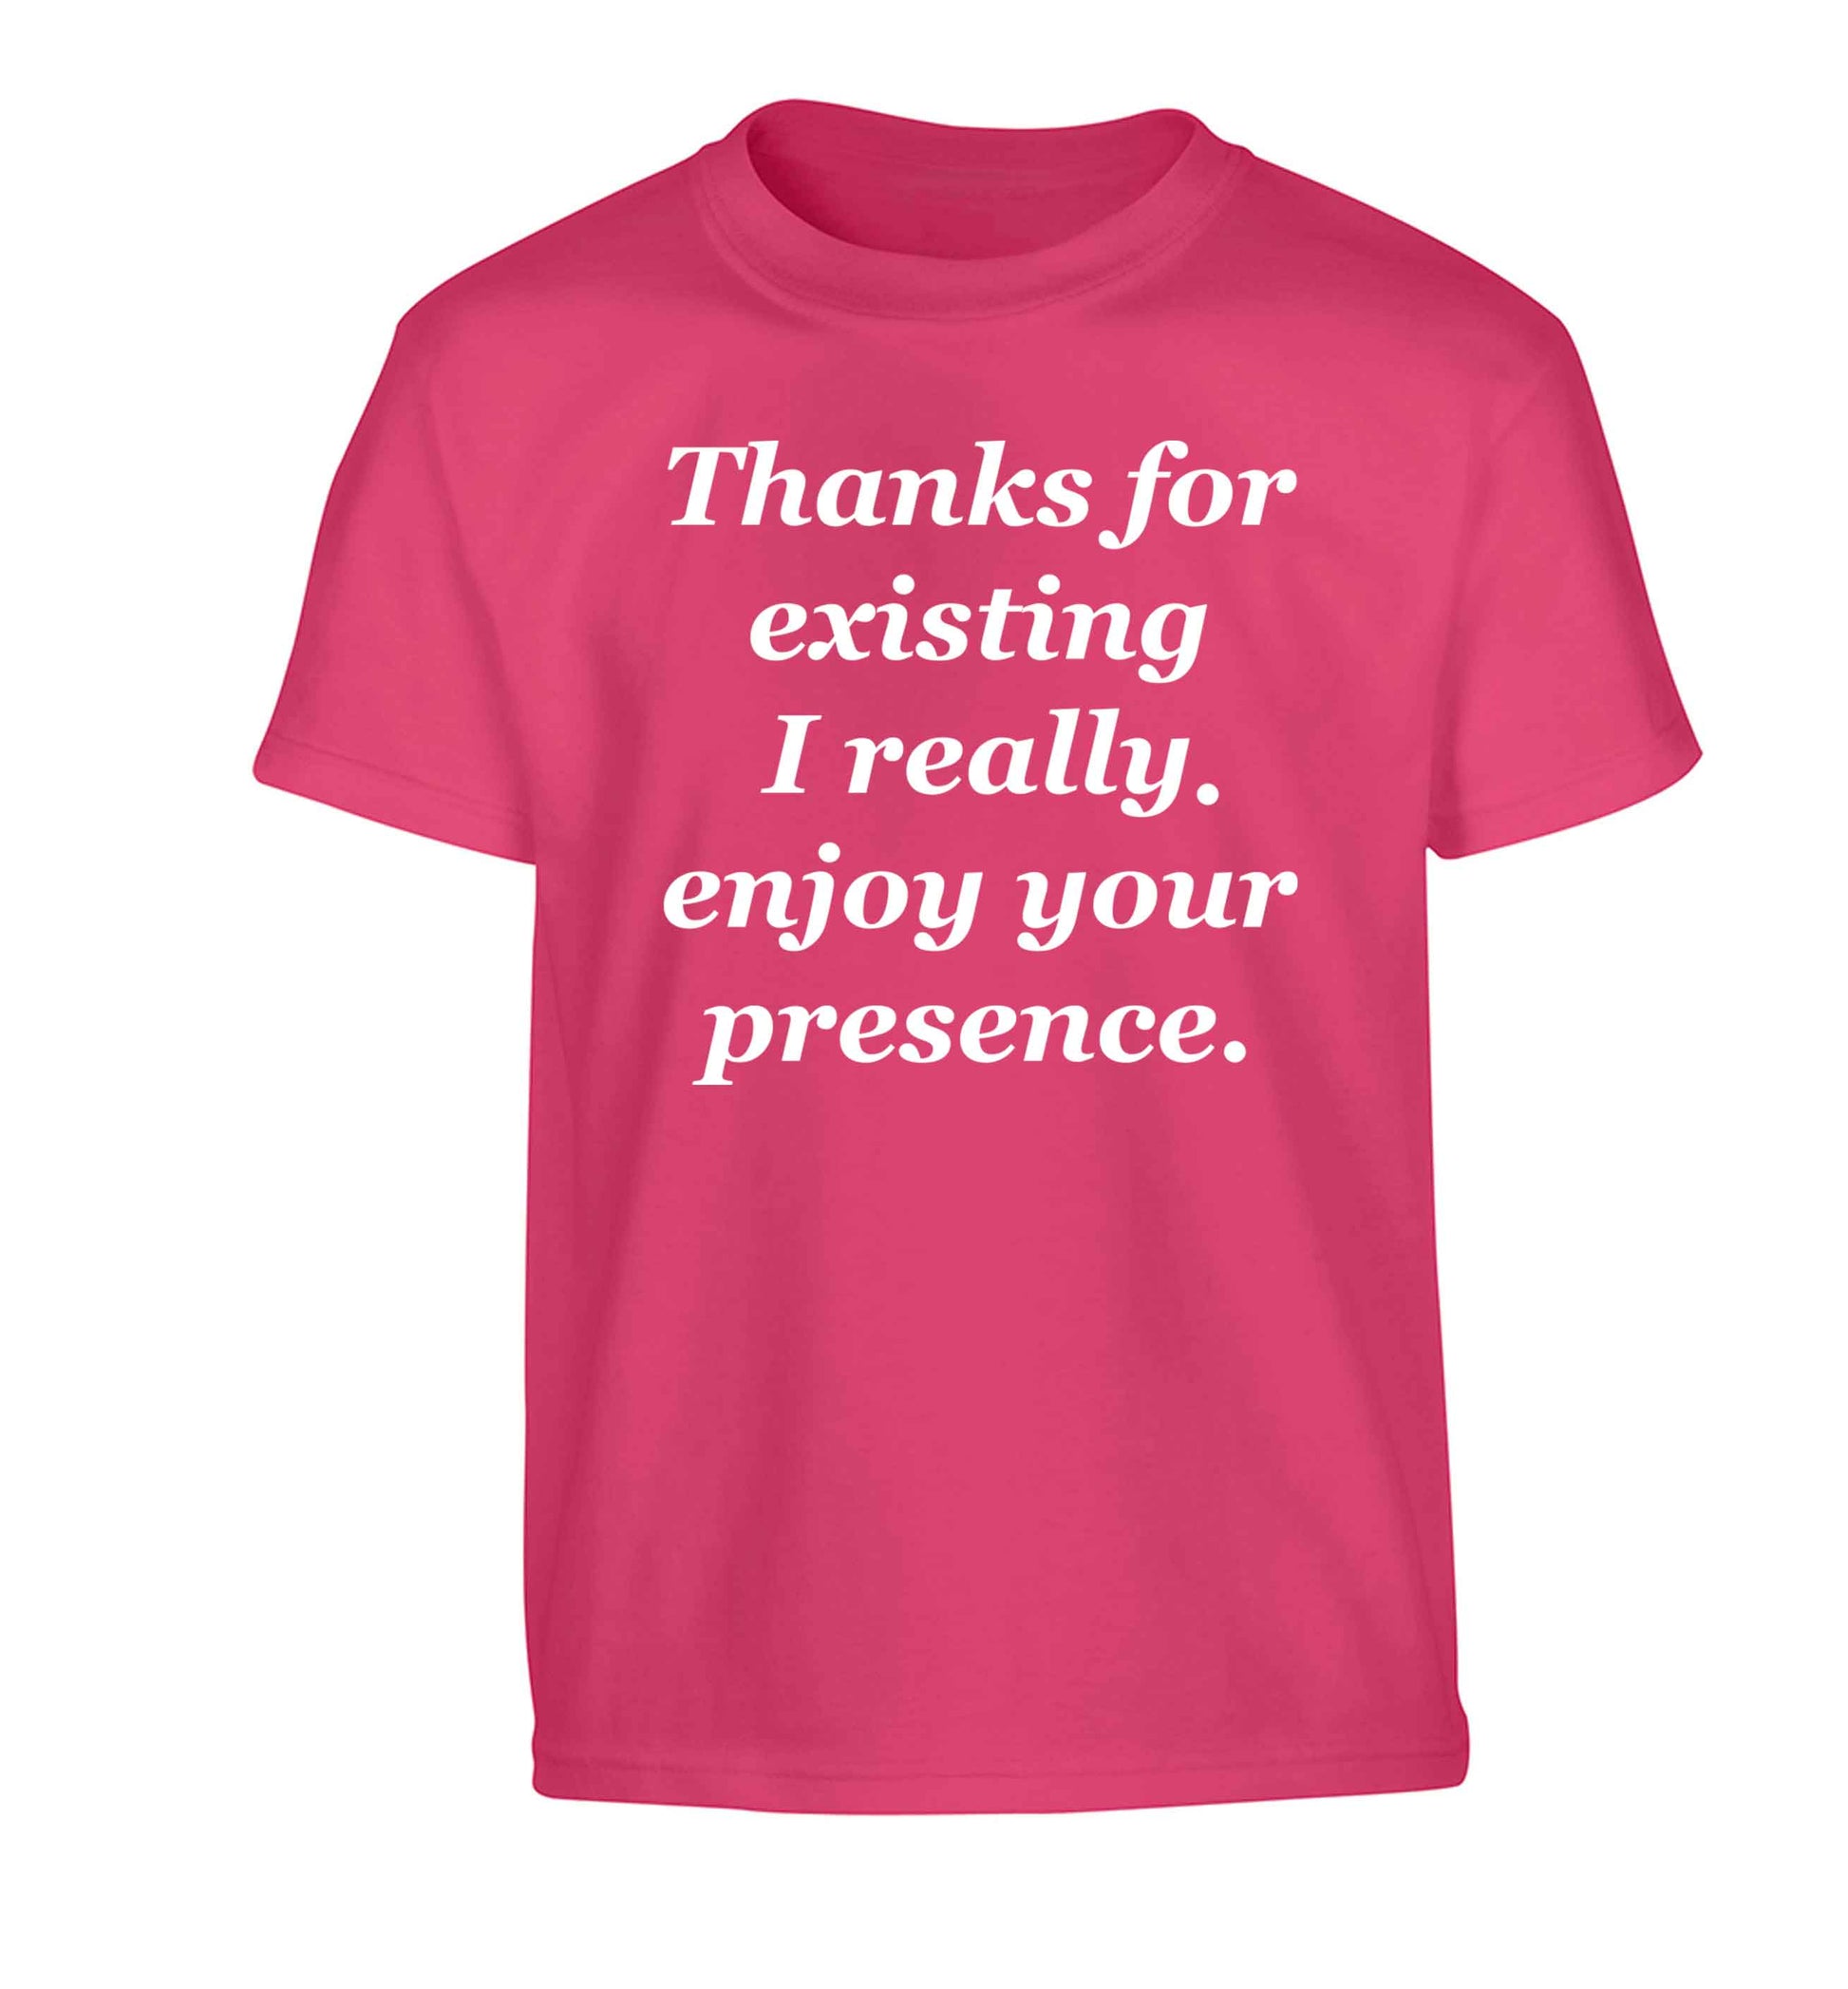 Thanks for existing I really enjoy your presence Children's pink Tshirt 12-13 Years